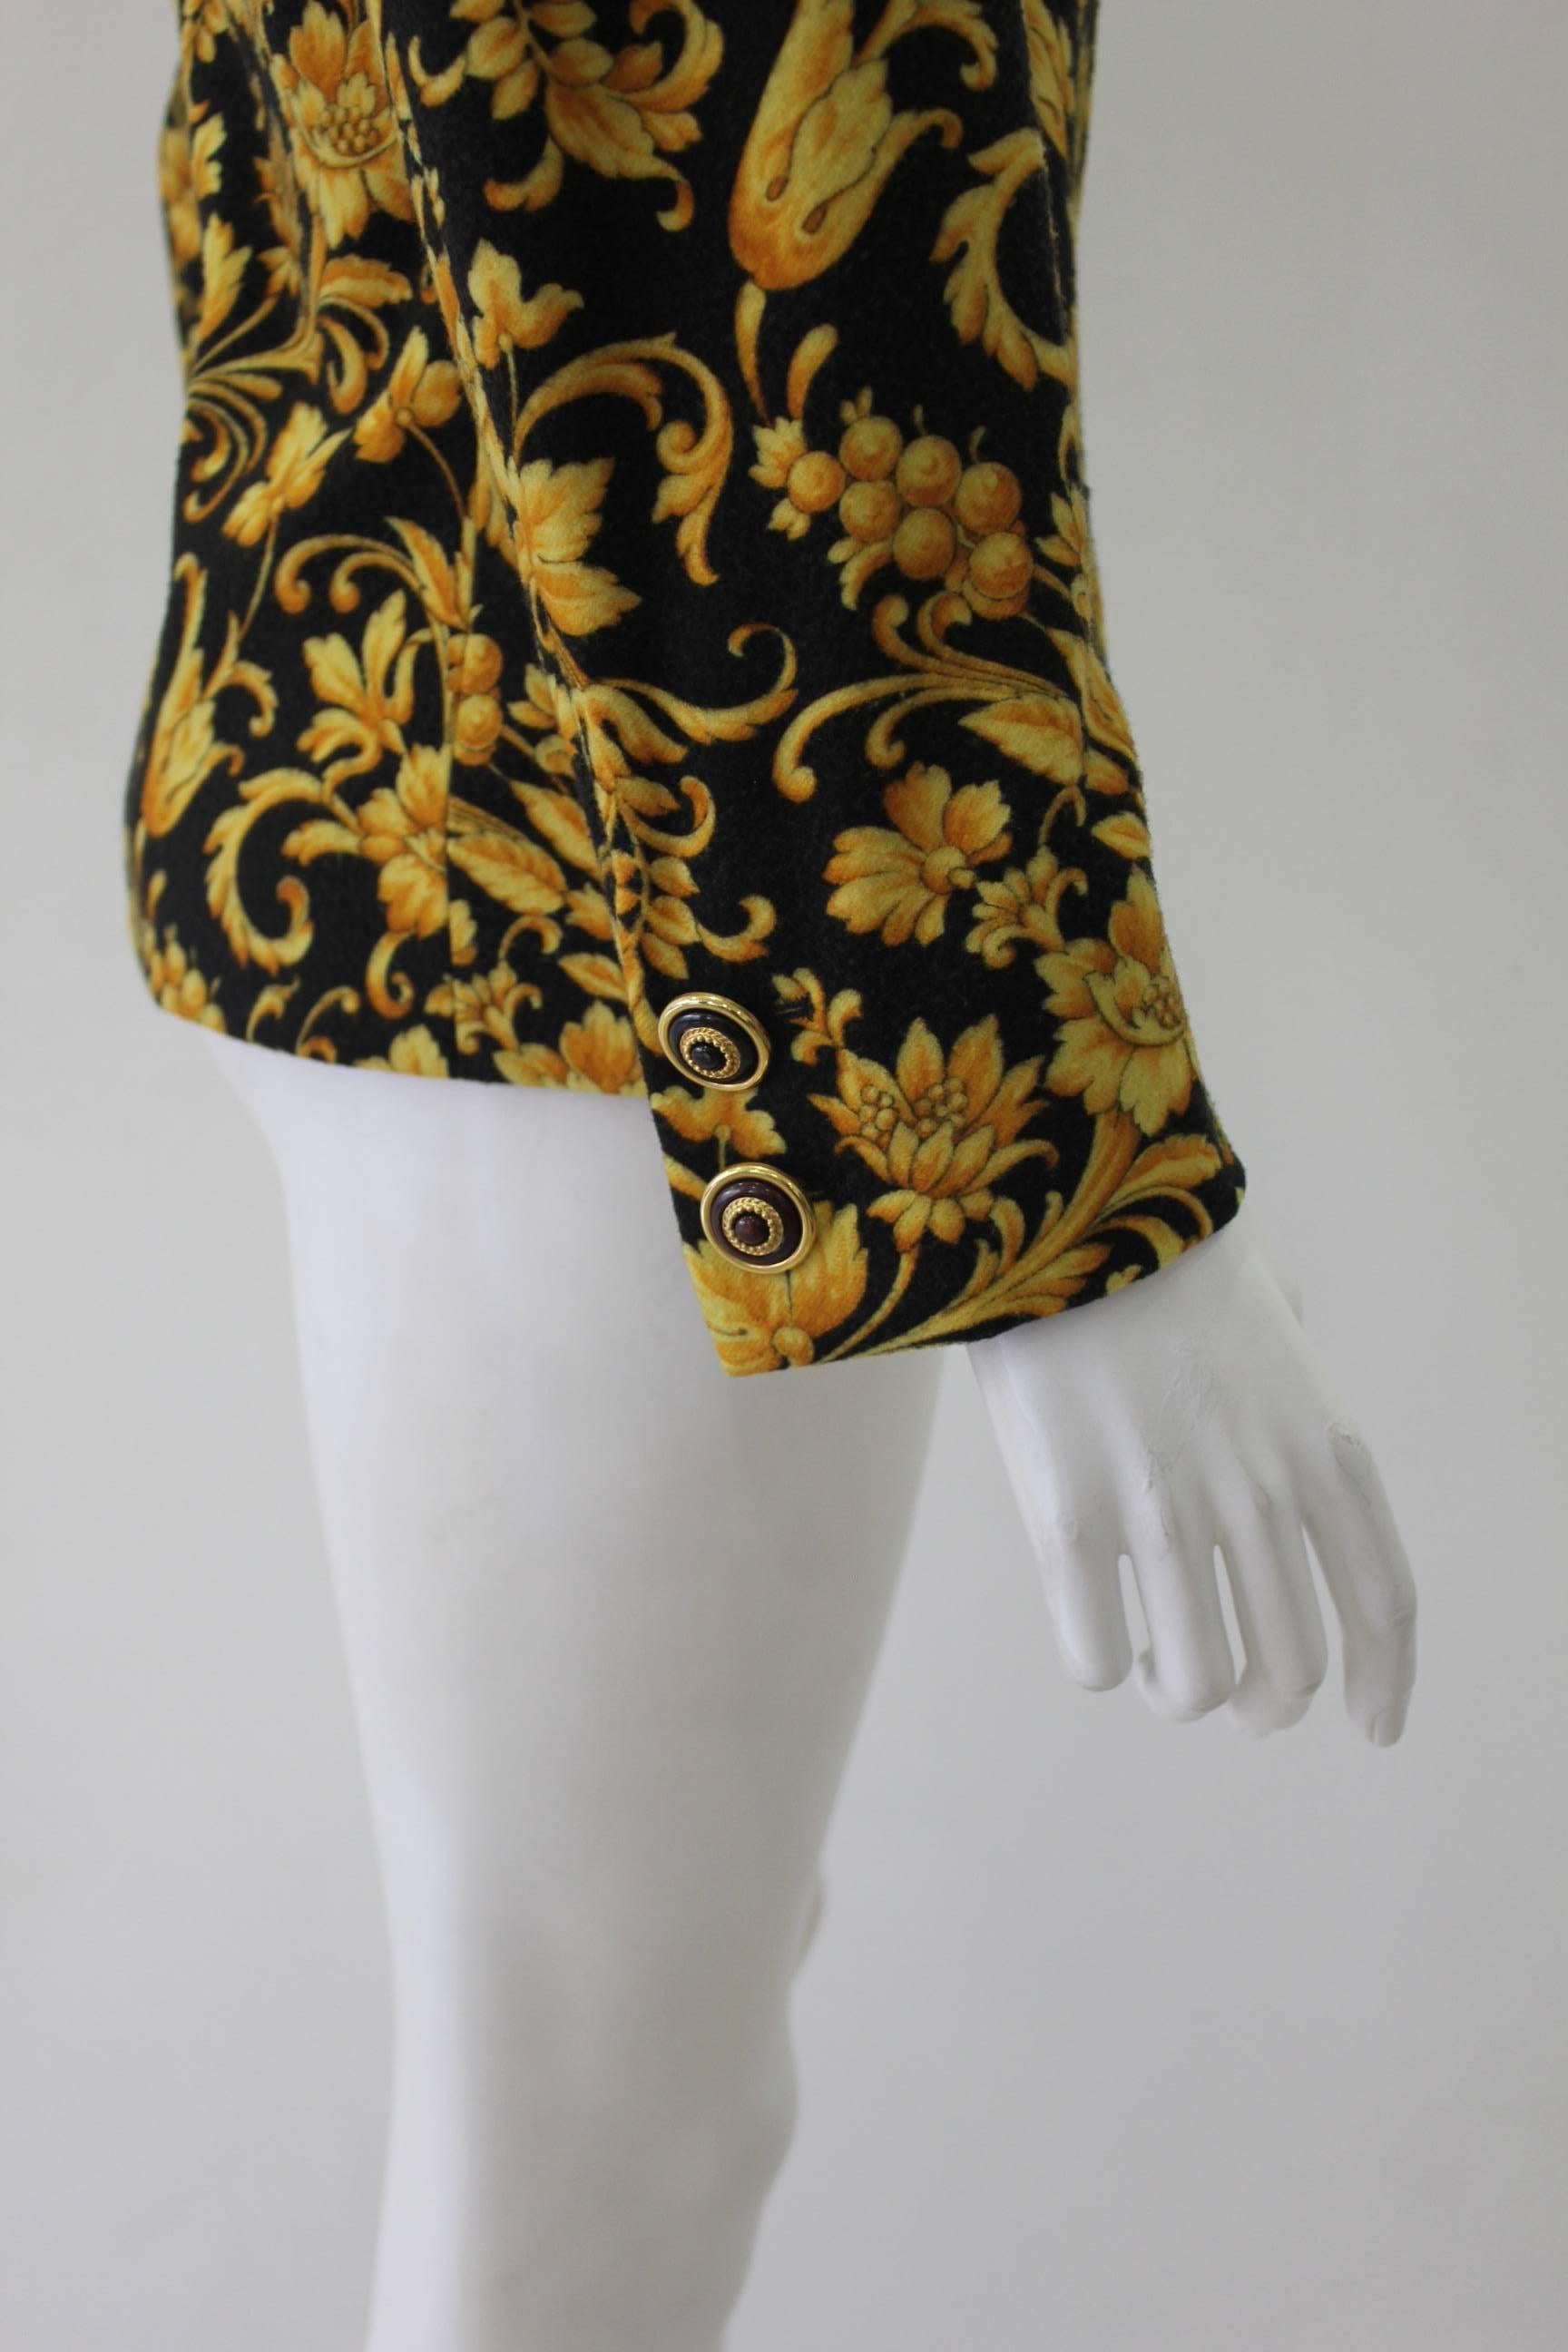 Women's Gianni Versace Baroque Printed Jacket Fall 1991 For Sale